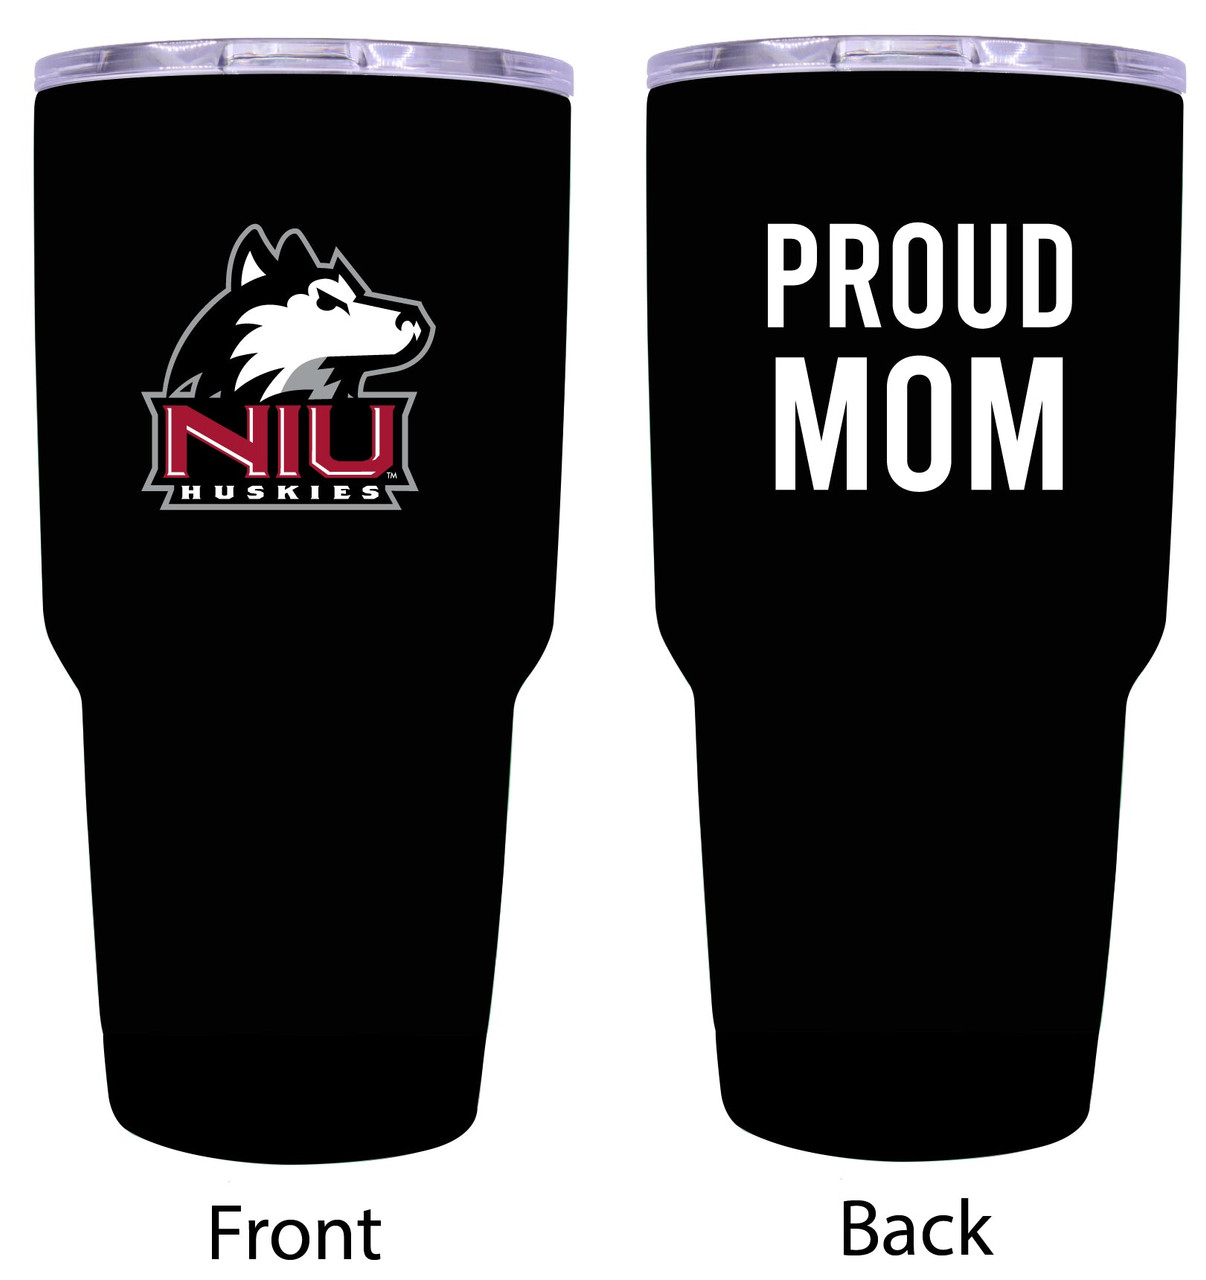 Northern Illinois Huskies Proud Mom 24 oz Insulated Stainless Steel Tumblers Choose Your Color.